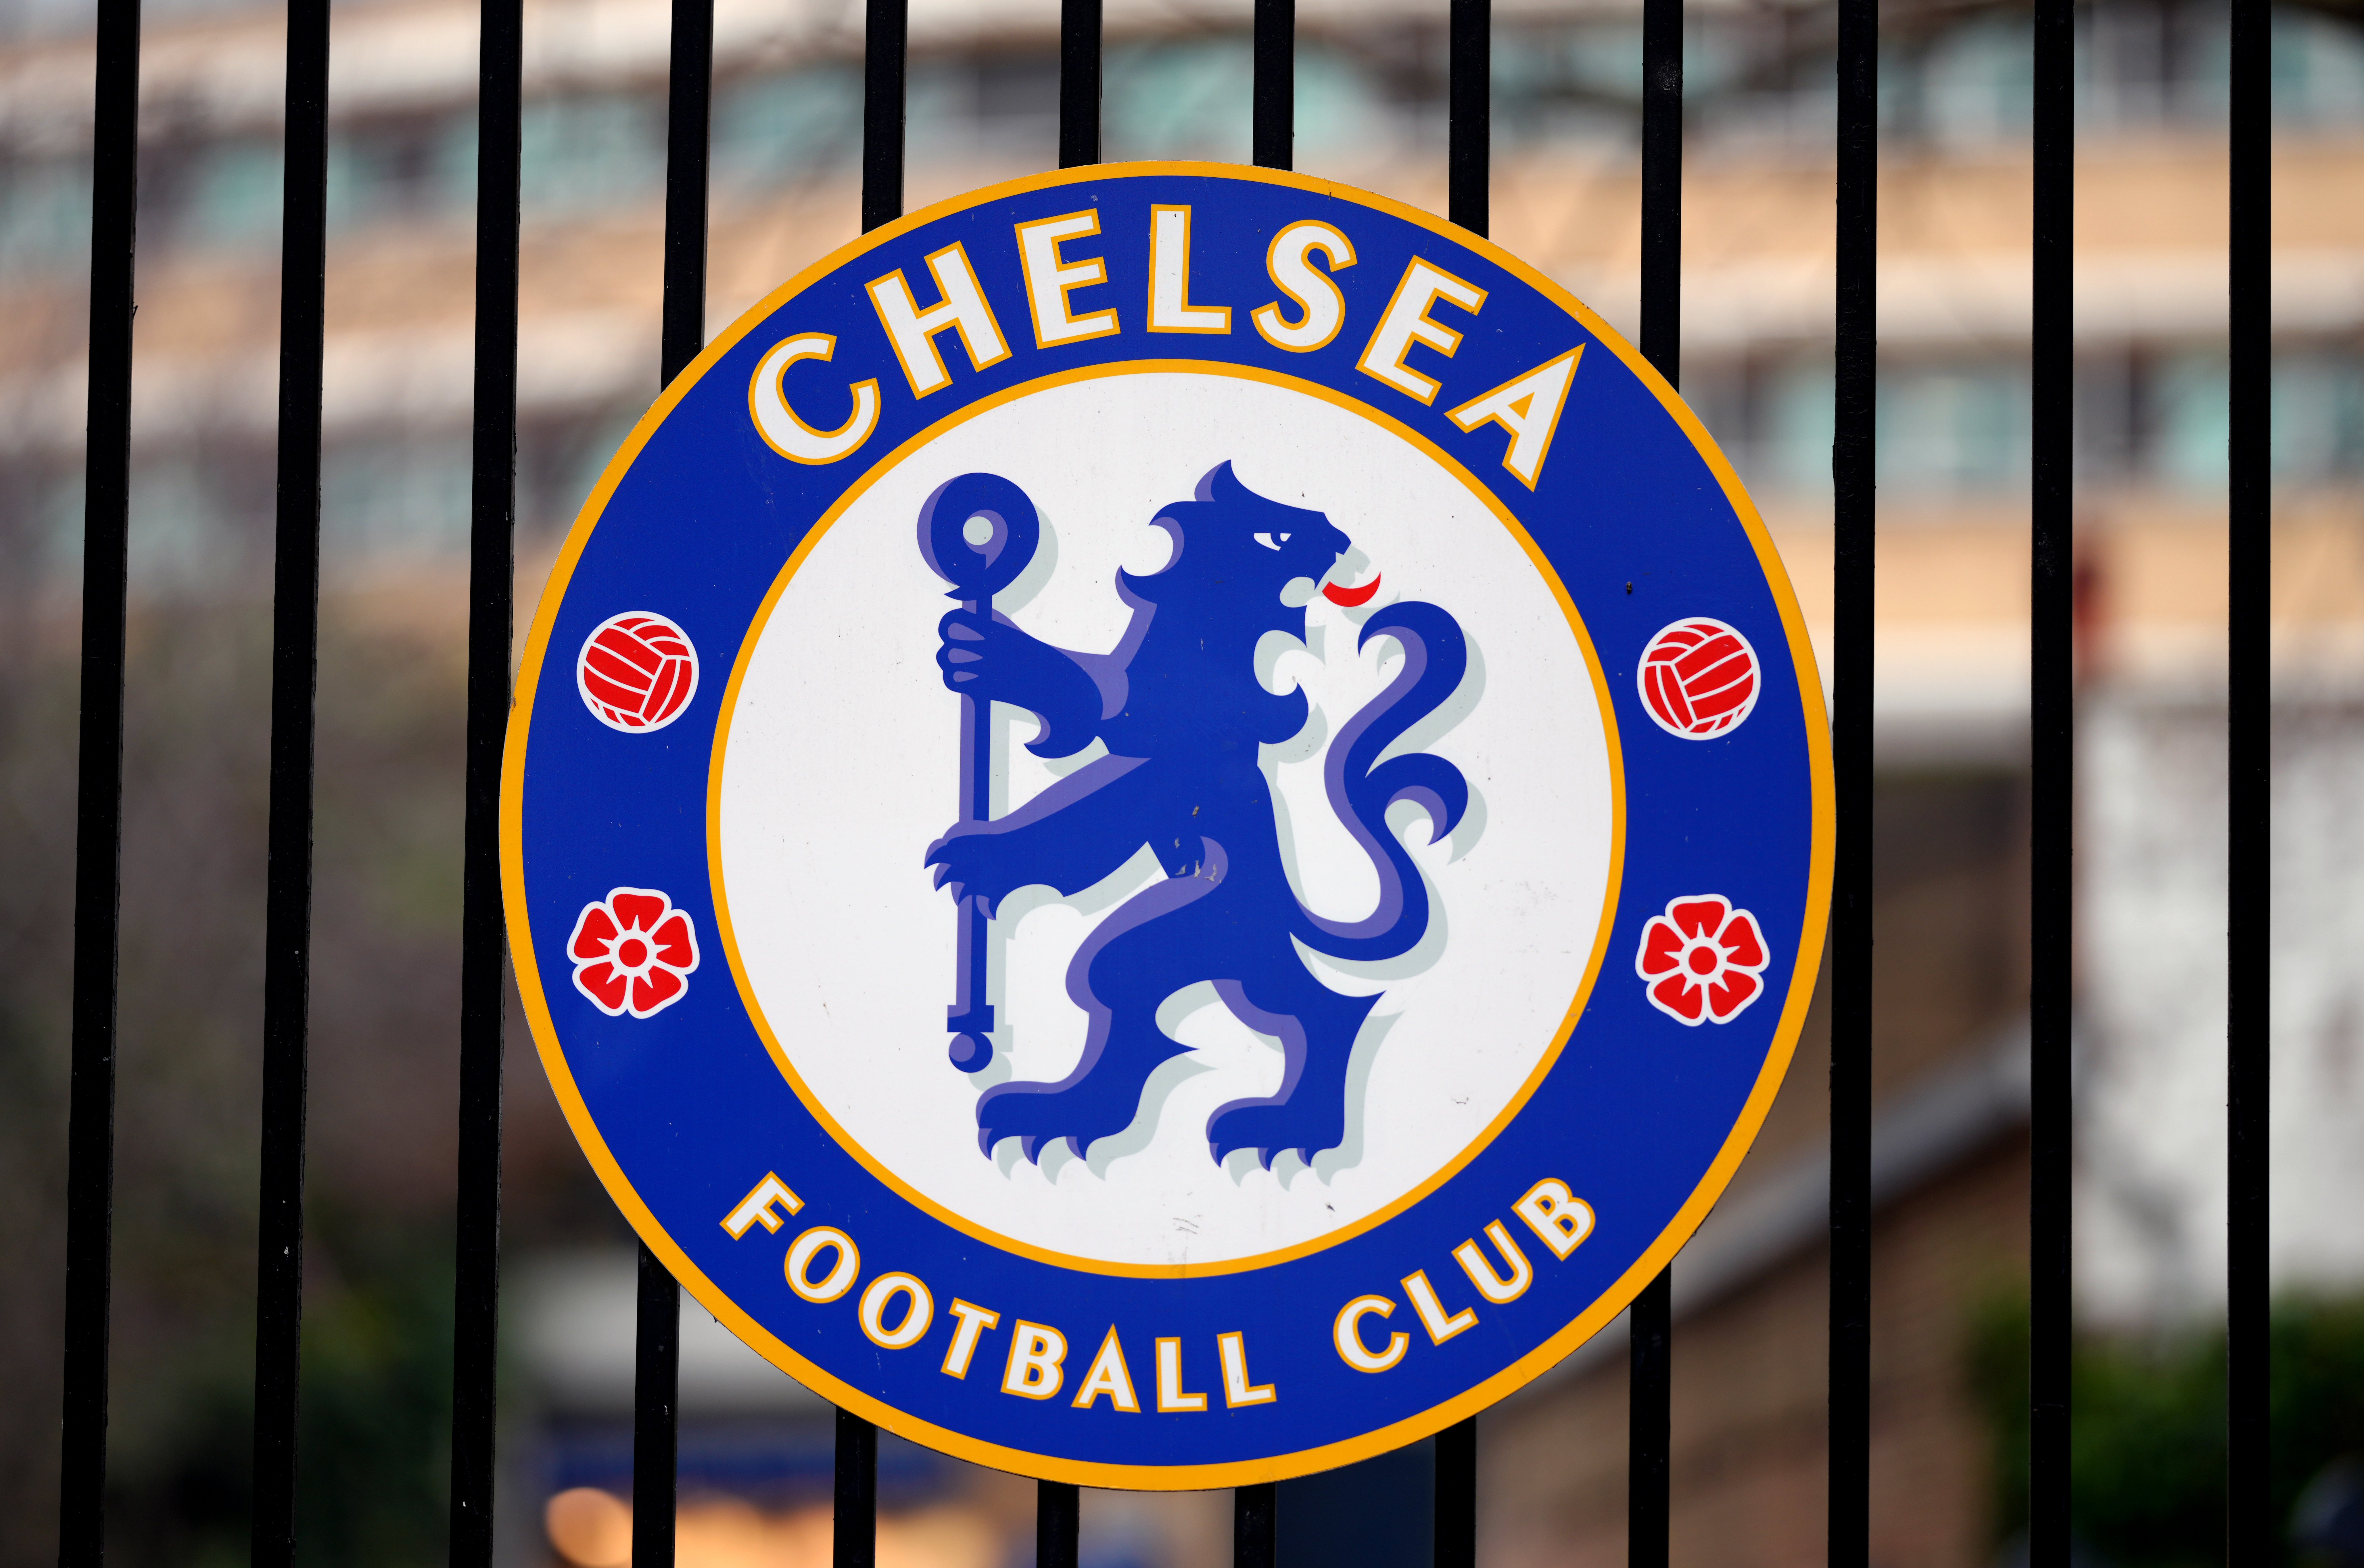 Chelsea continue to operate under government sanctions